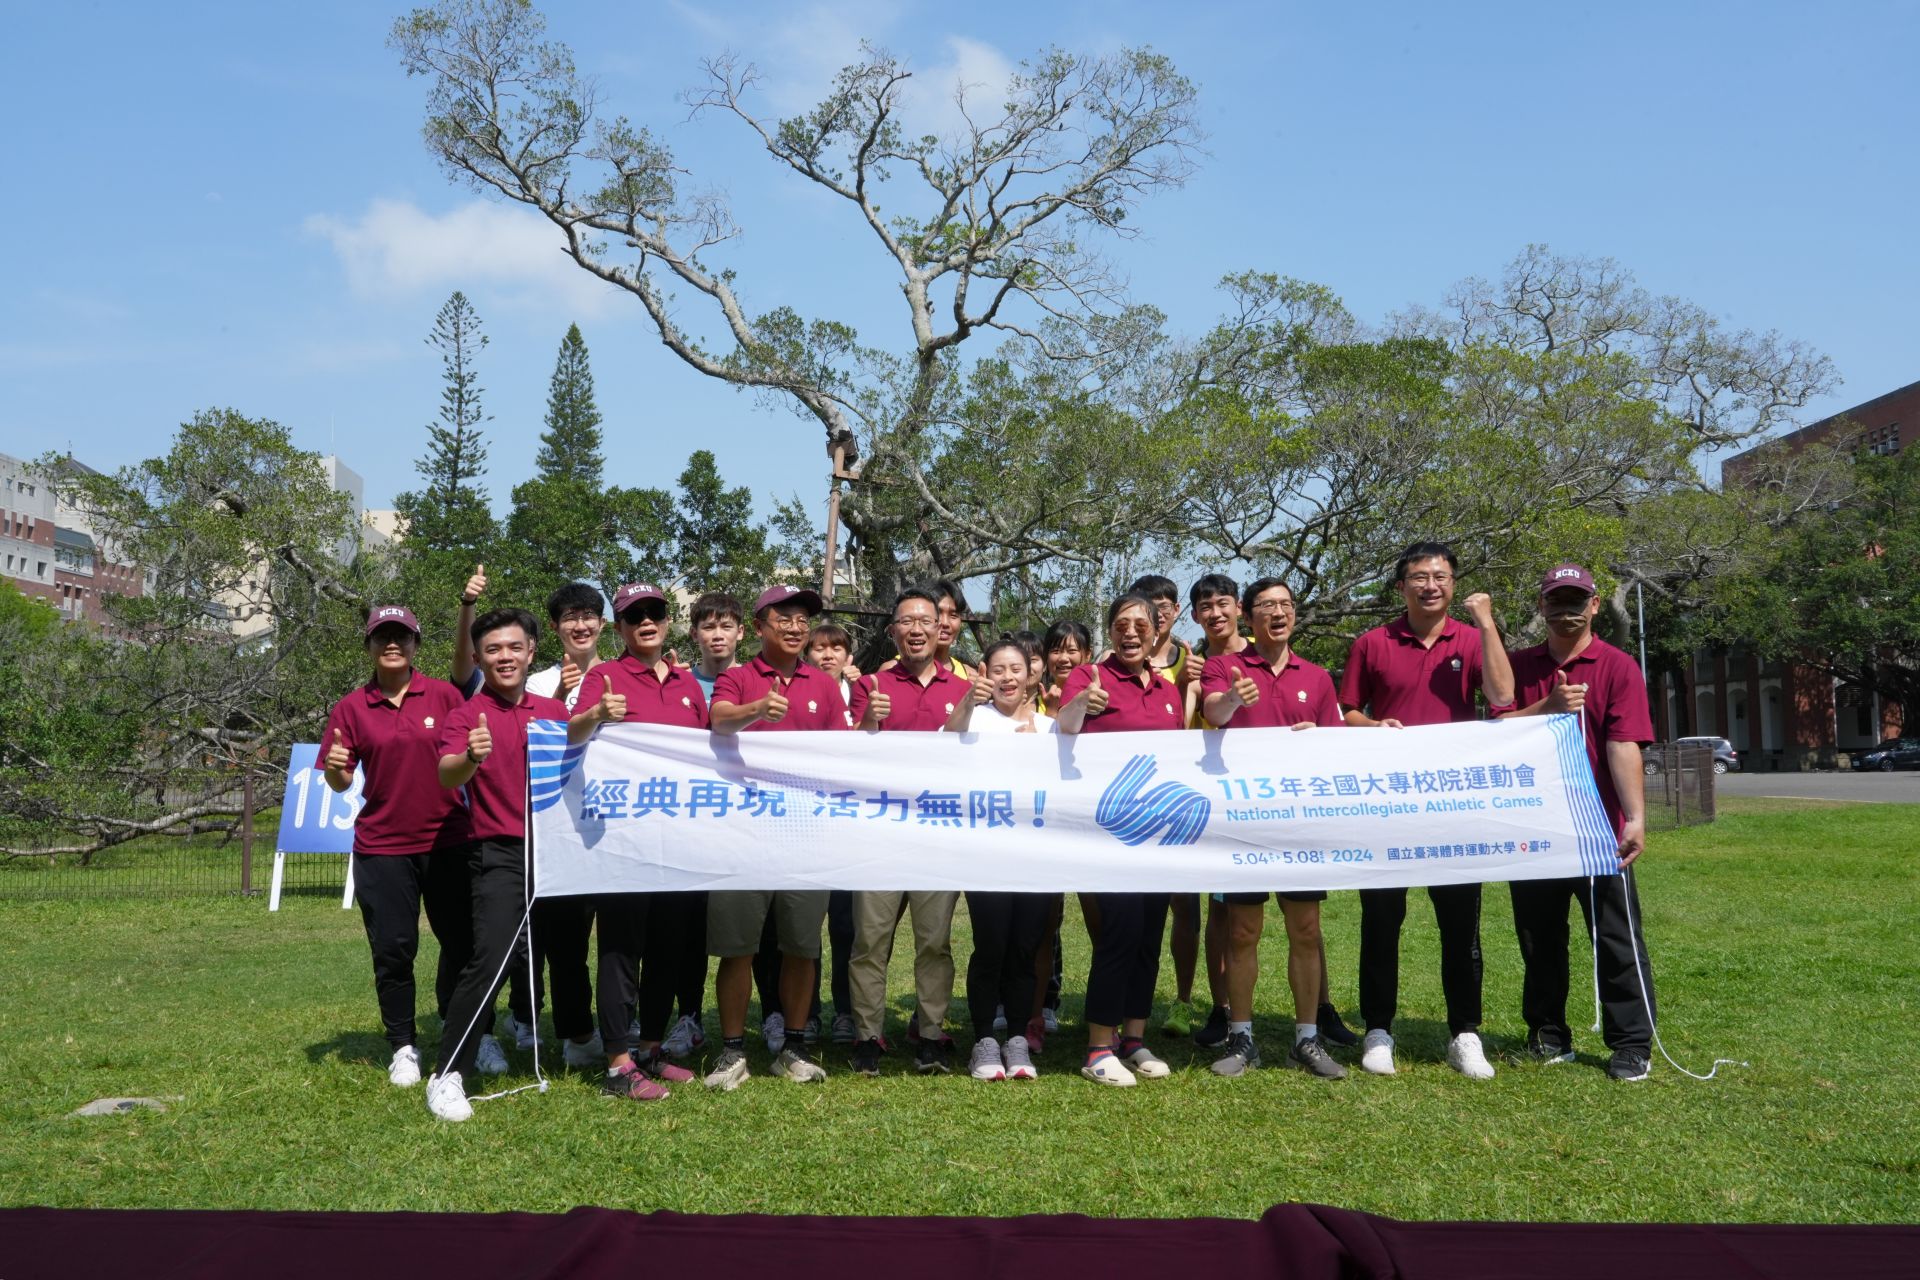 The torch relay for the 113th National Intercollegiate Athletic Games arrived at NCKU.